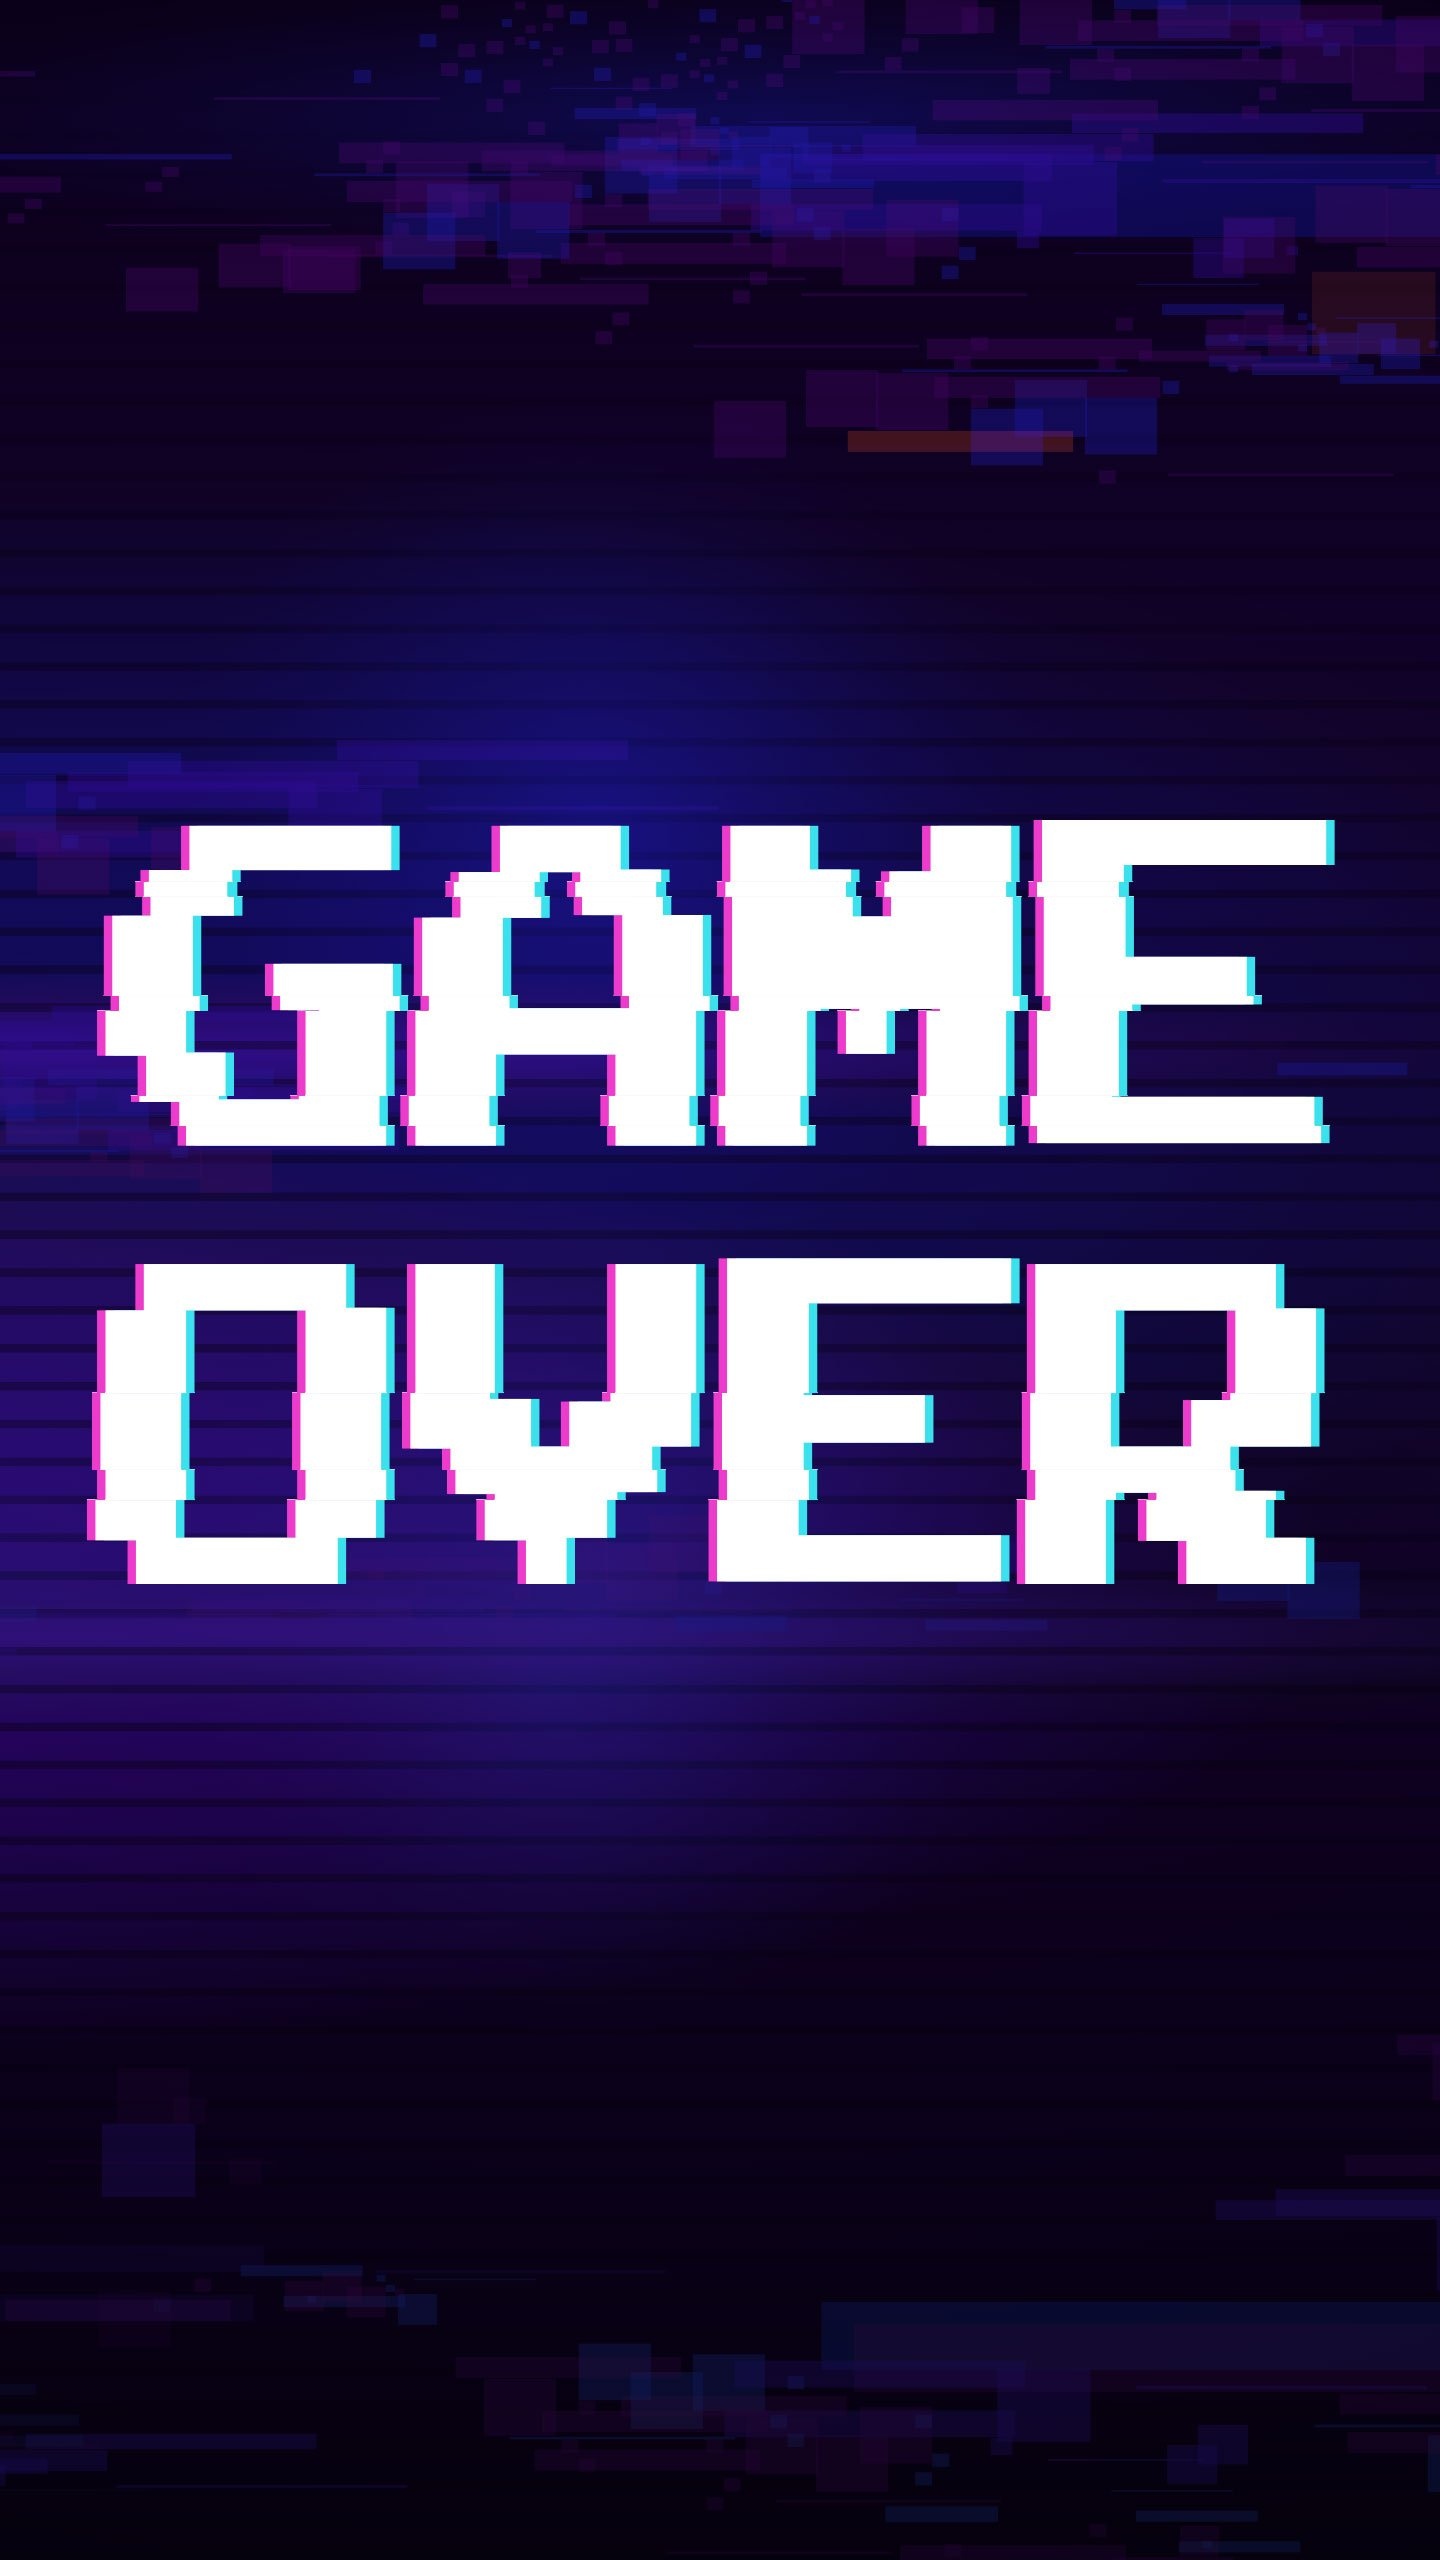 Game Over, Hot selling games, 60% off, Popular theme, 1440x2560 HD Handy